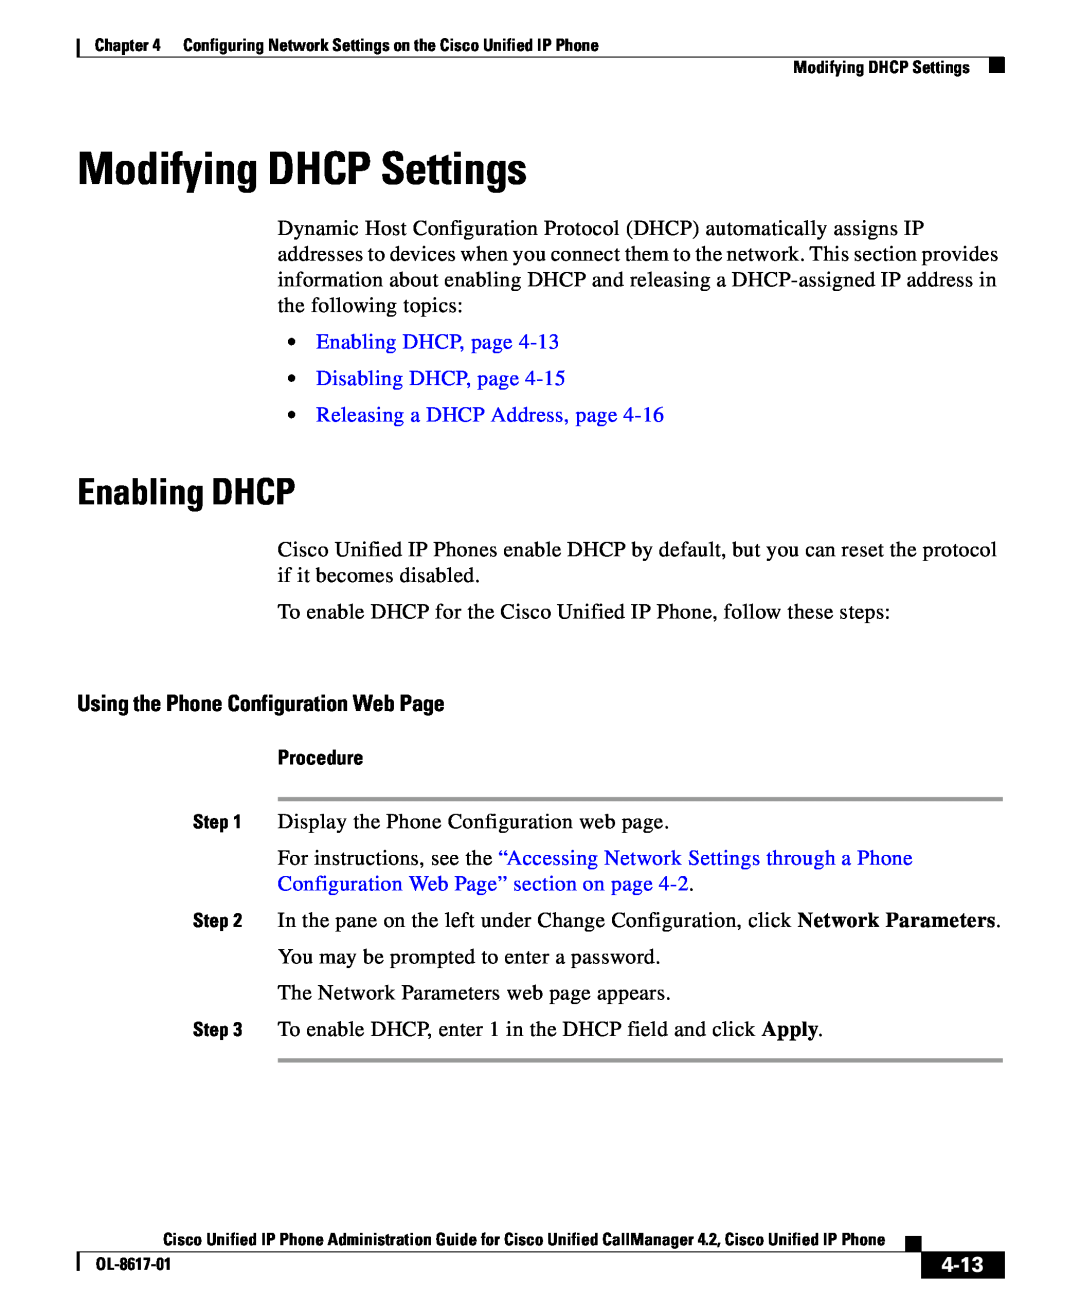 Cisco Systems 4.2 Modifying DHCP Settings, Enabling DHCP, page Disabling DHCP, page, Releasing a DHCP Address, page 